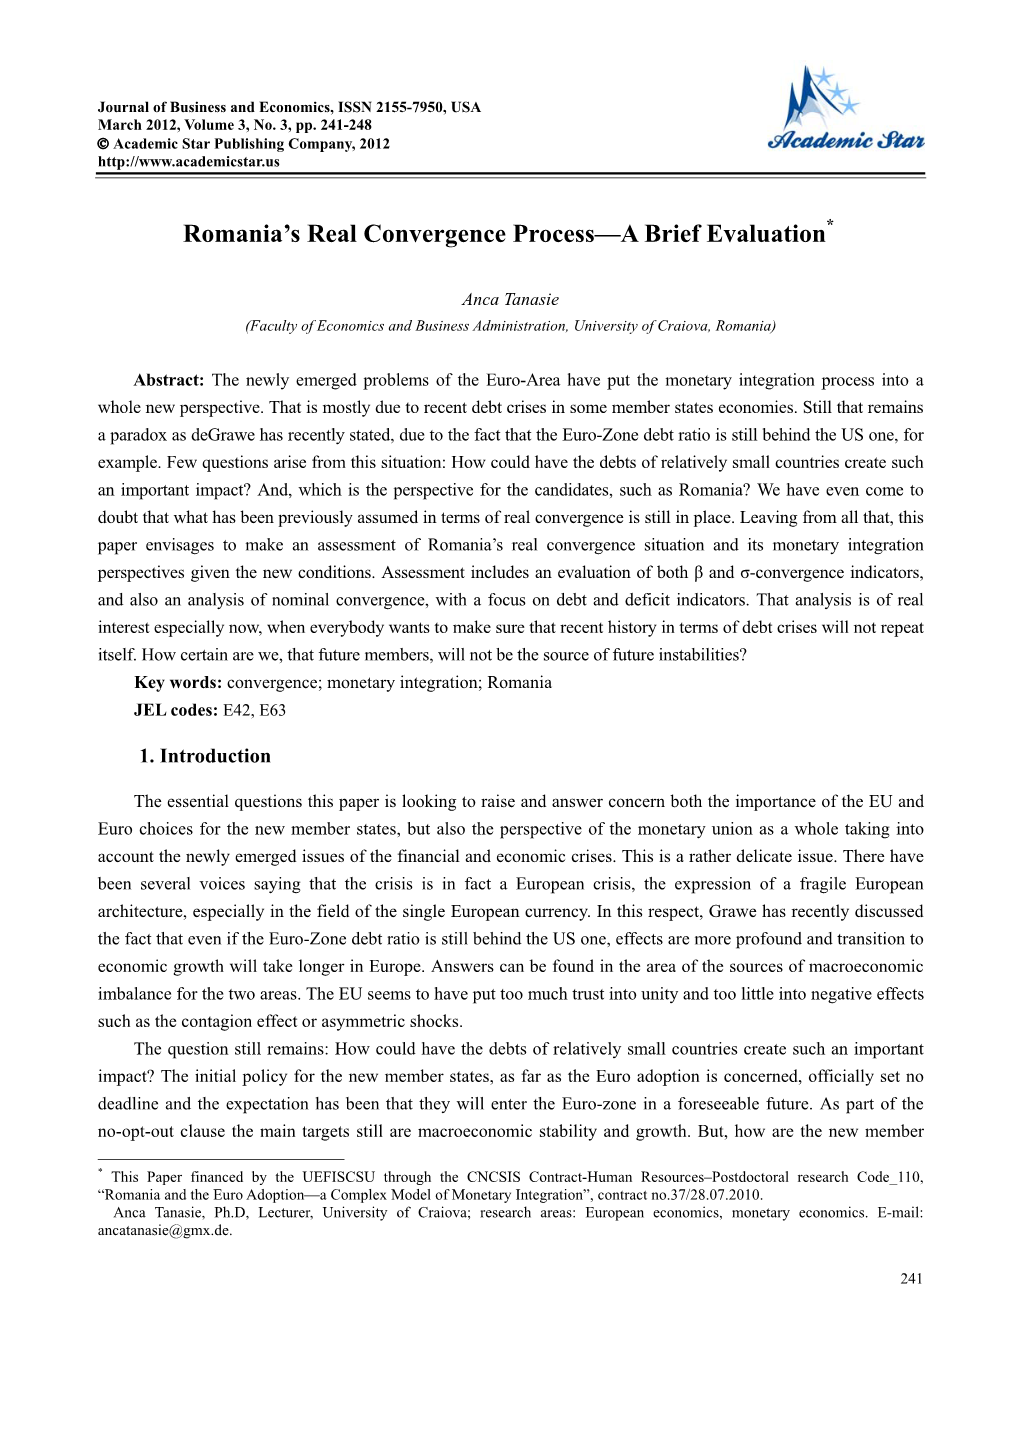 Romania's Real Convergence Process—A Brief Evaluation